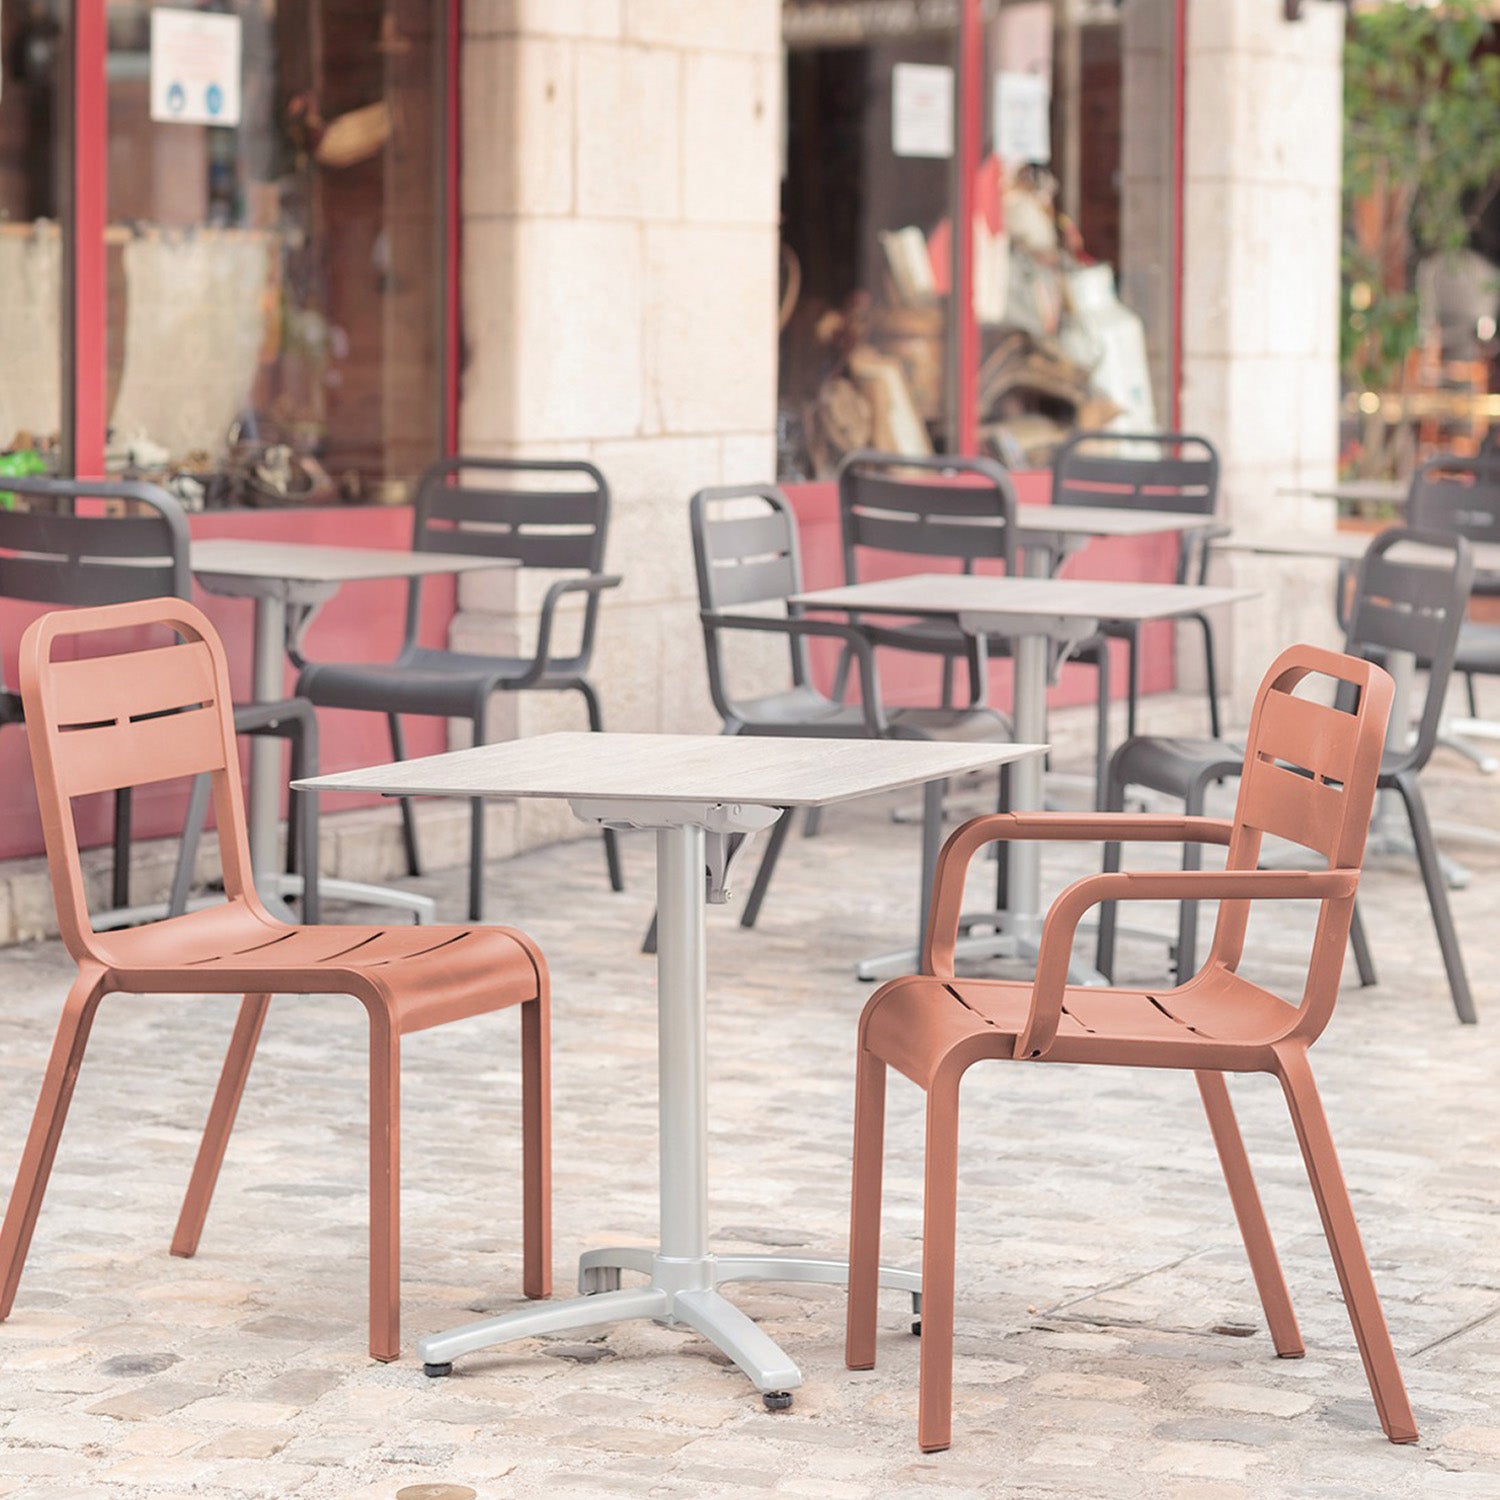 Dining chairs on a outdoor restaurant patio